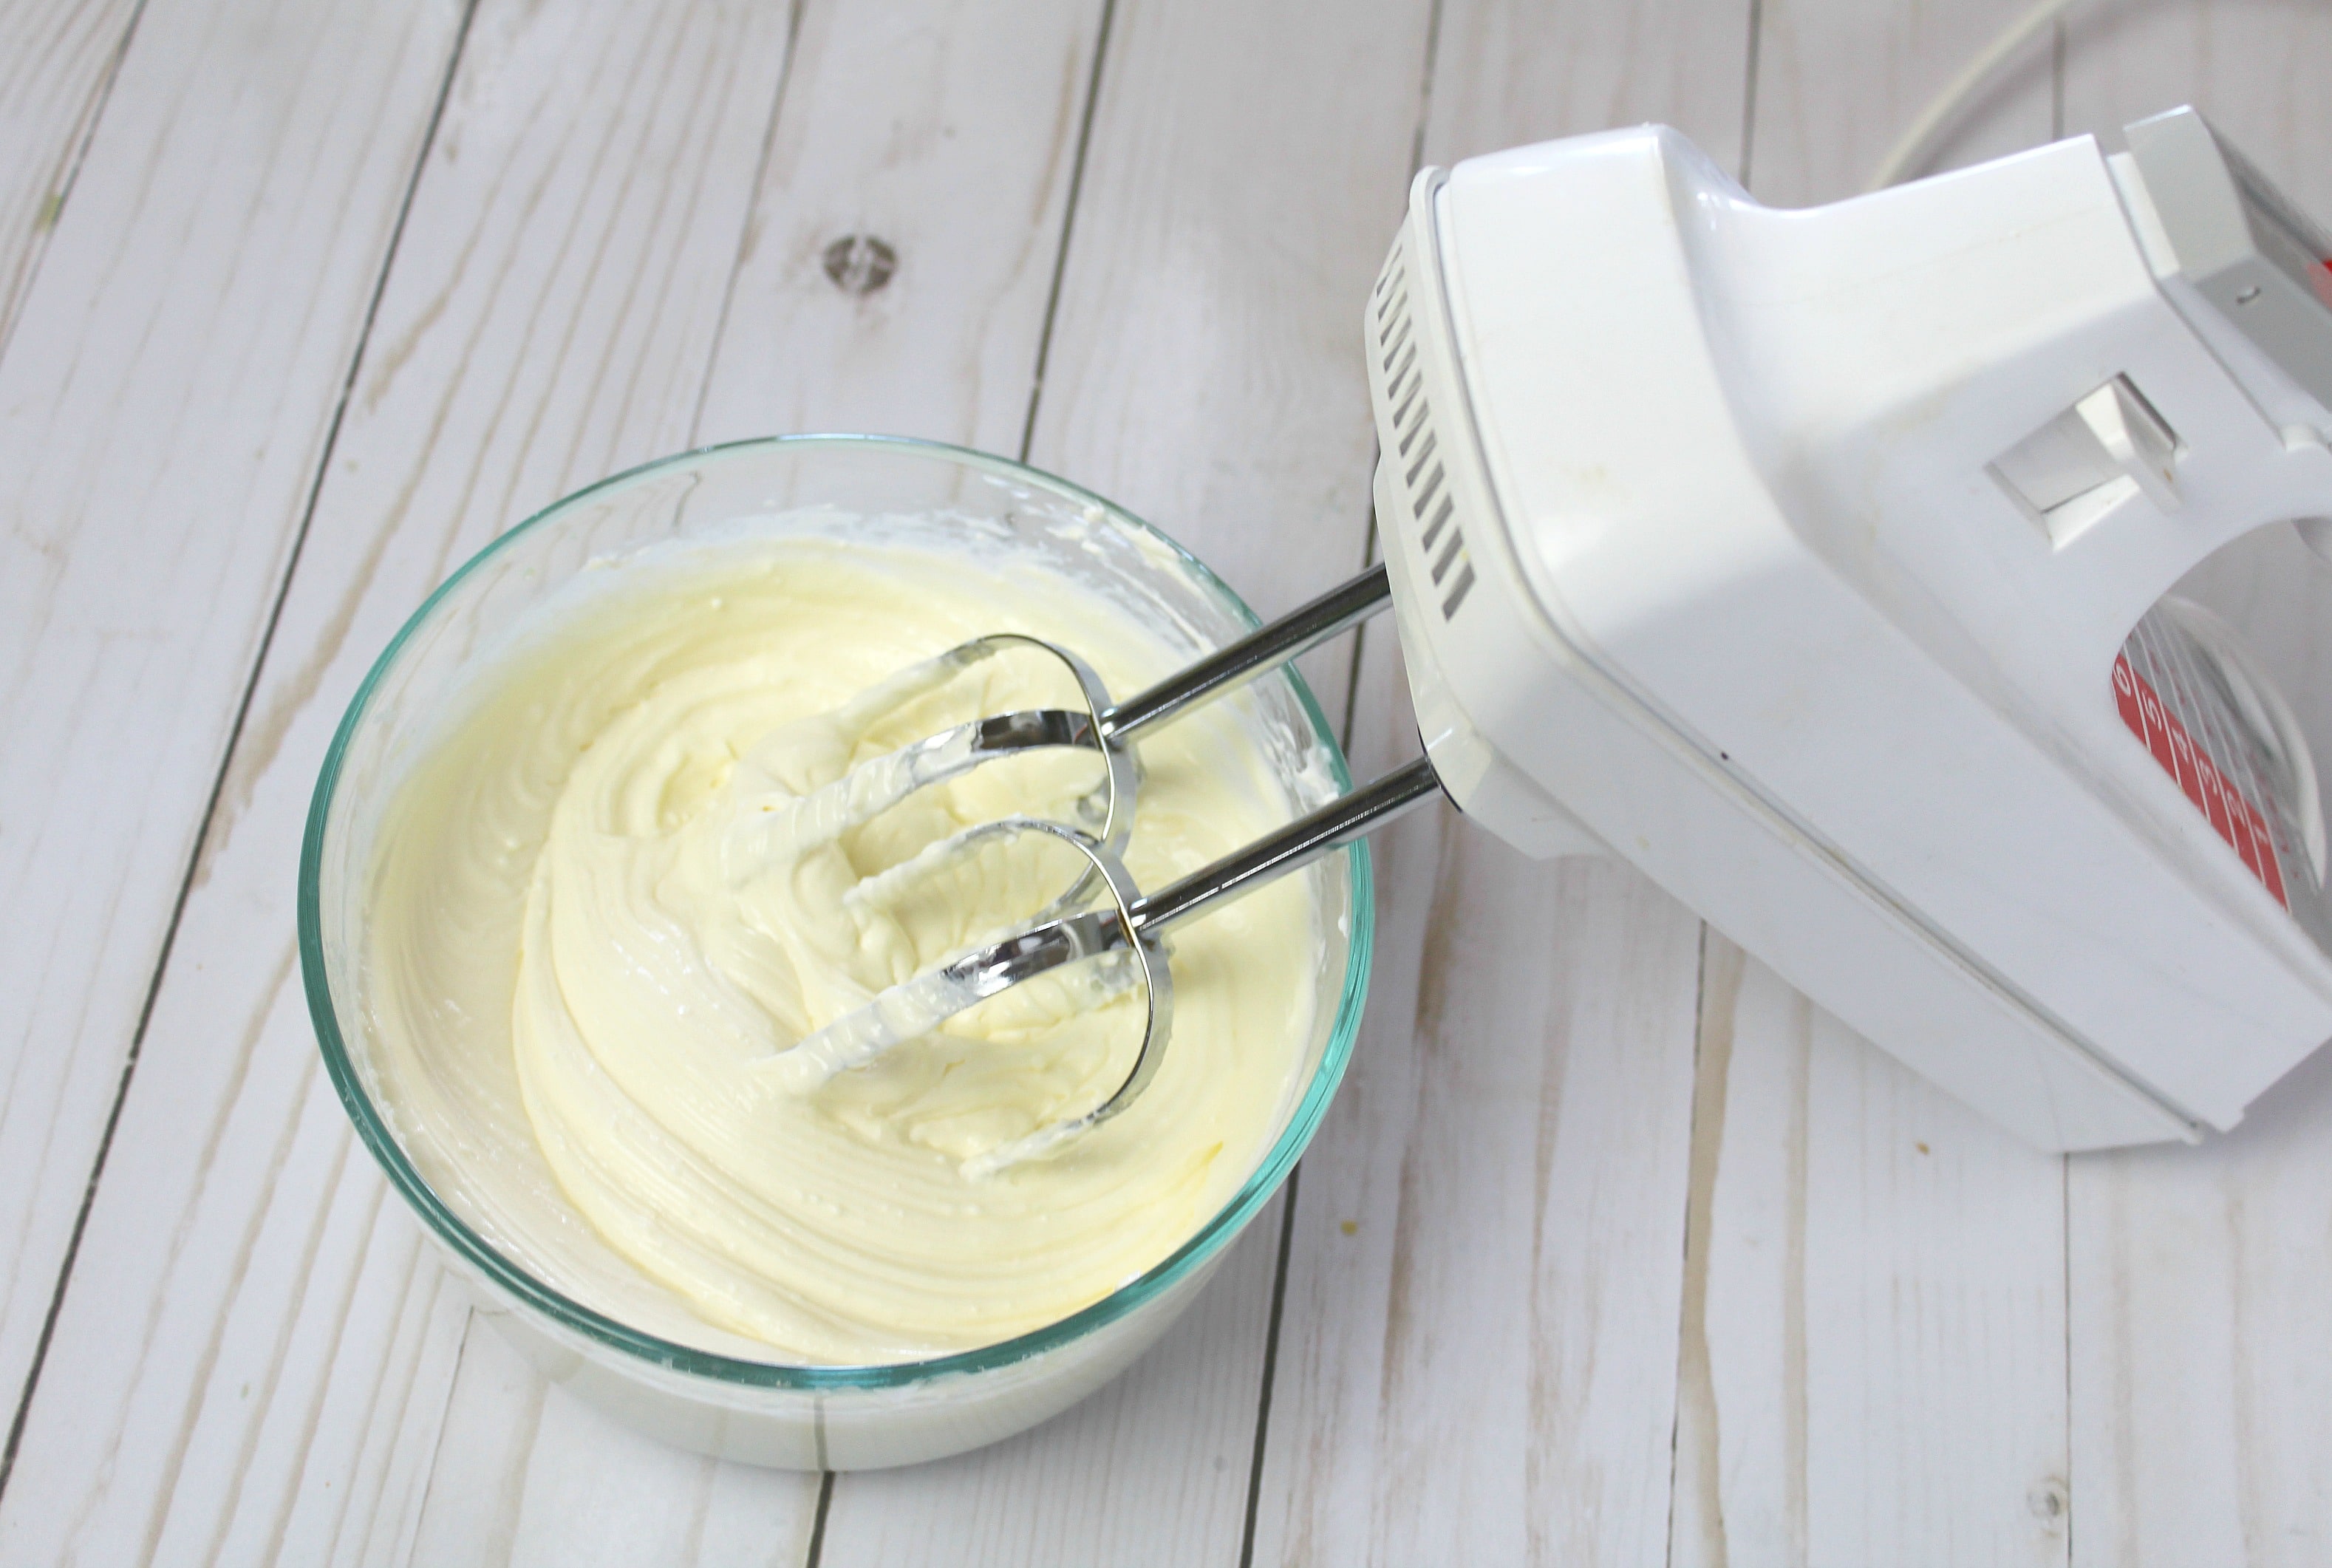 In a bowl beat cream cheese, sugar and an egg on high until fluffy and smooth.